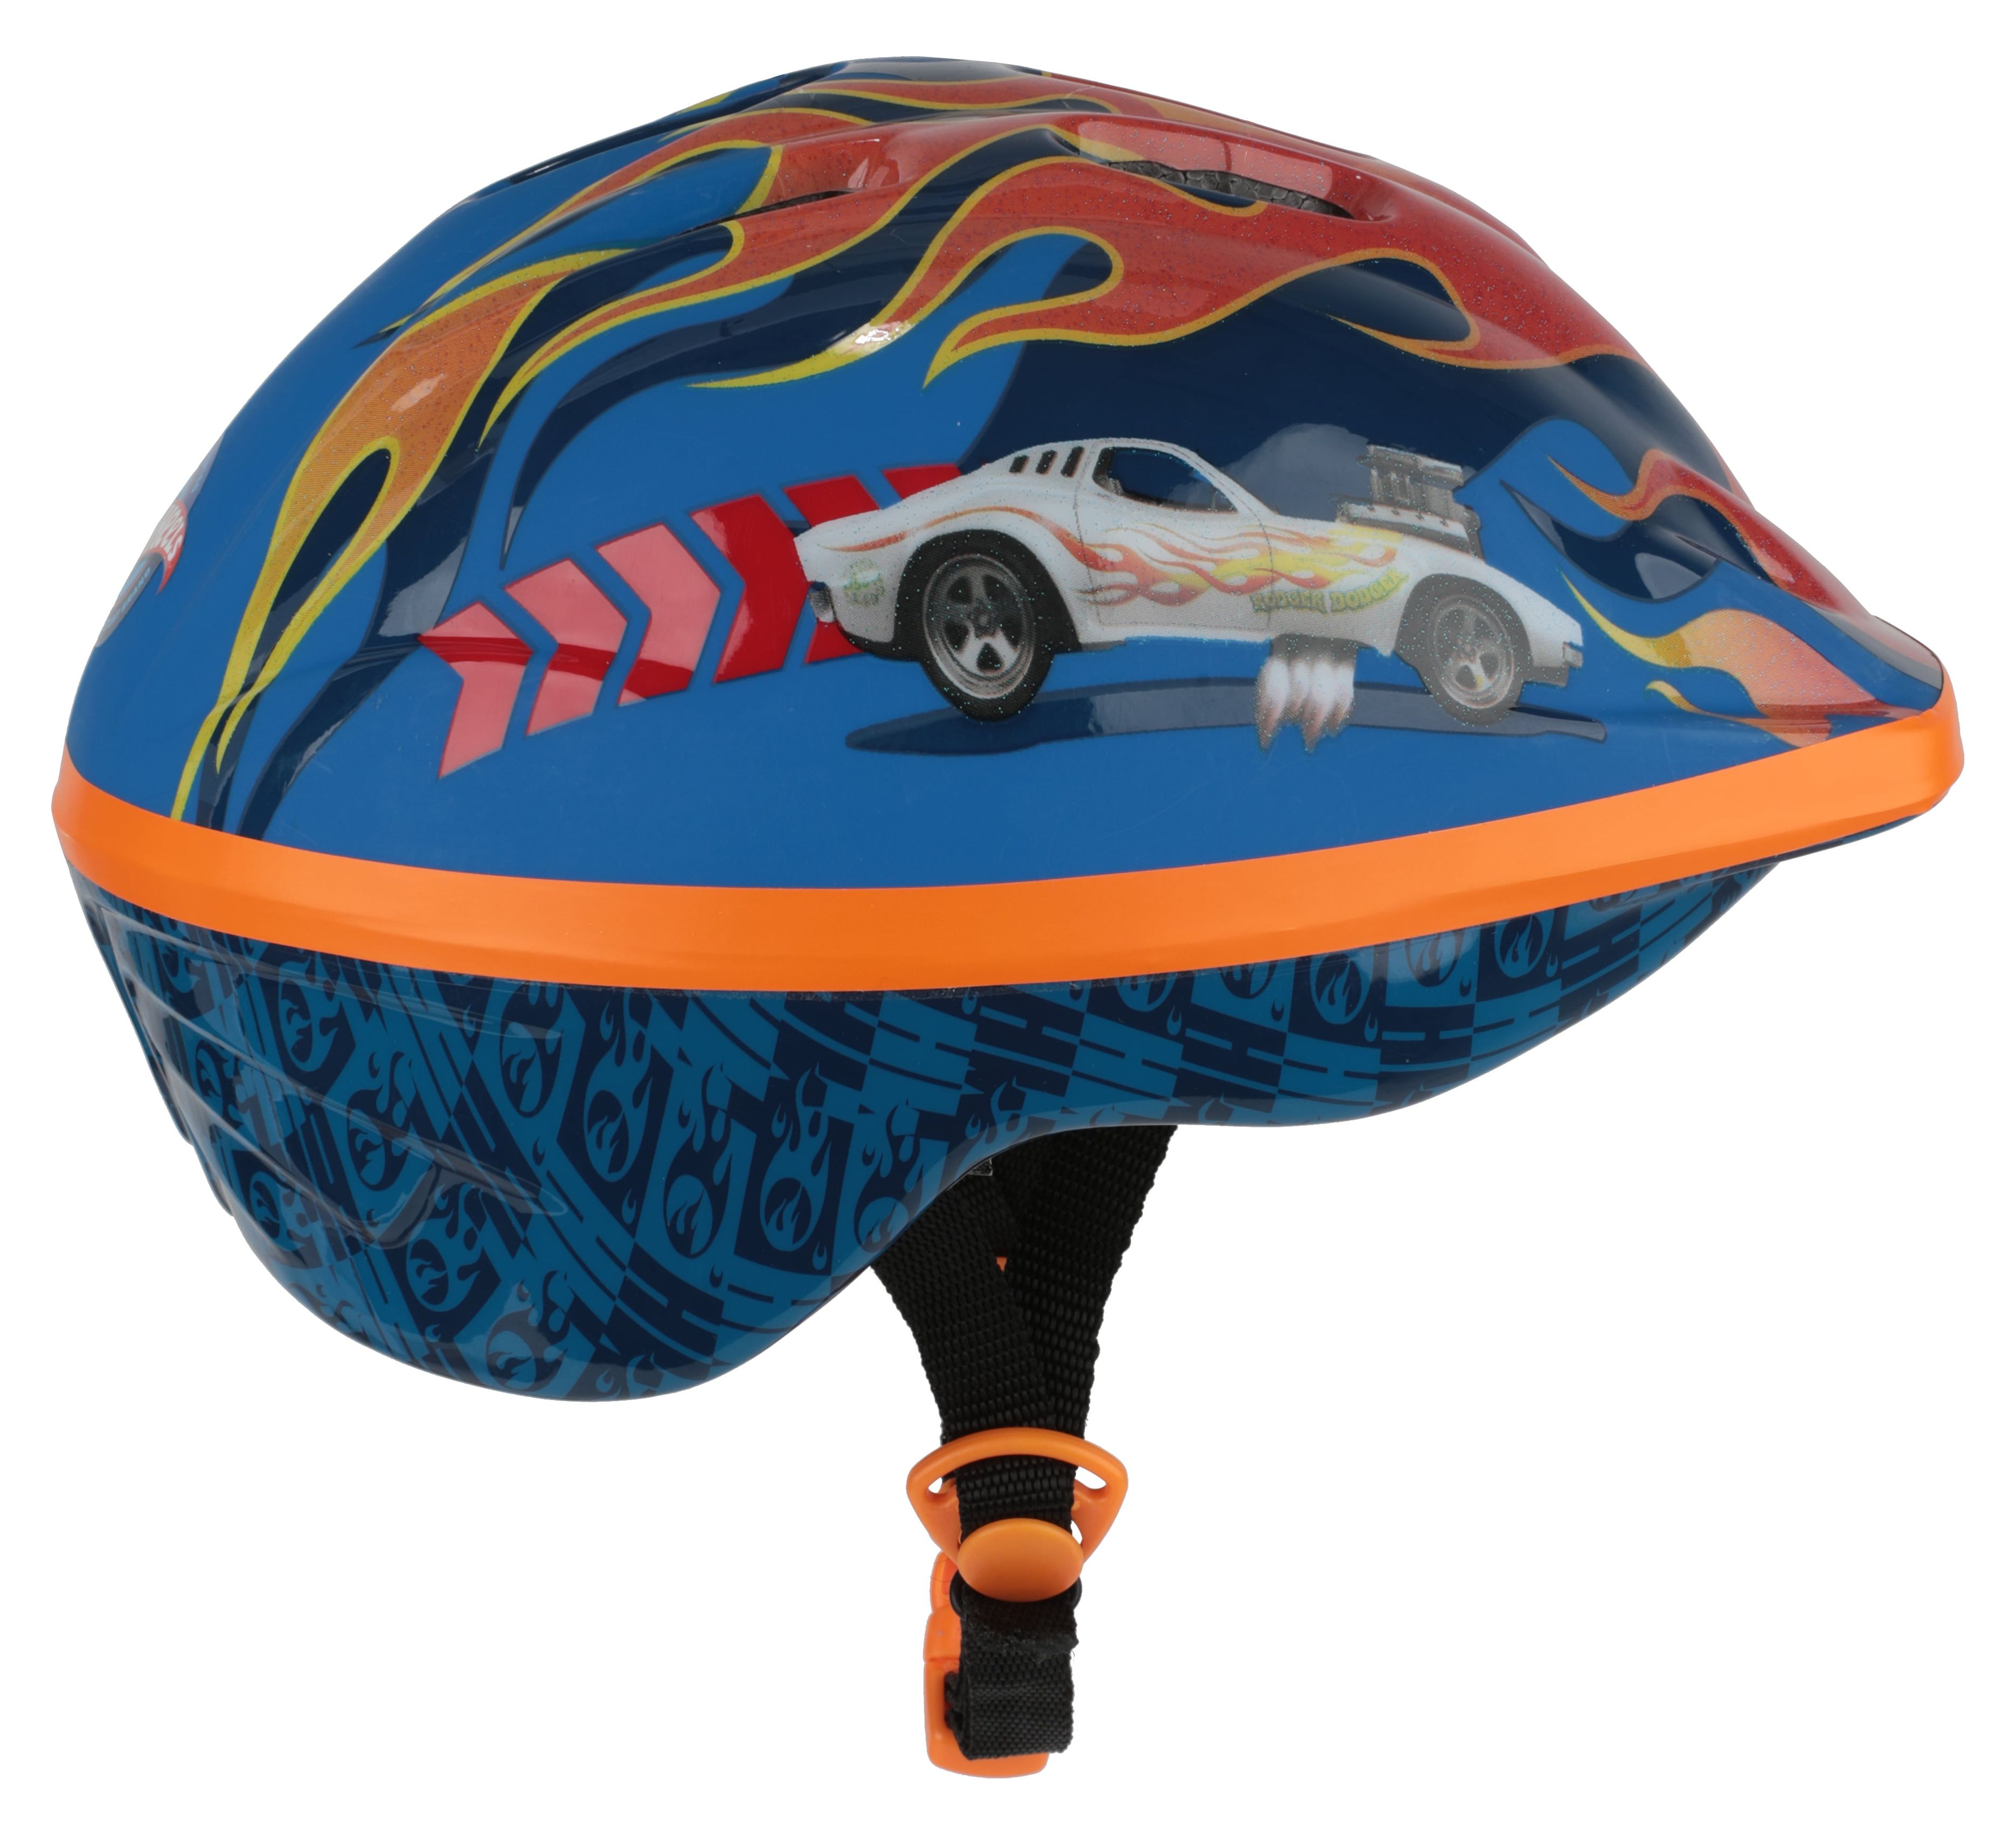 Hot Wheels Helmet with Surprise Bonus Car for Bikes, Skateboards and Scooters, Ages 5+ - image 8 of 10